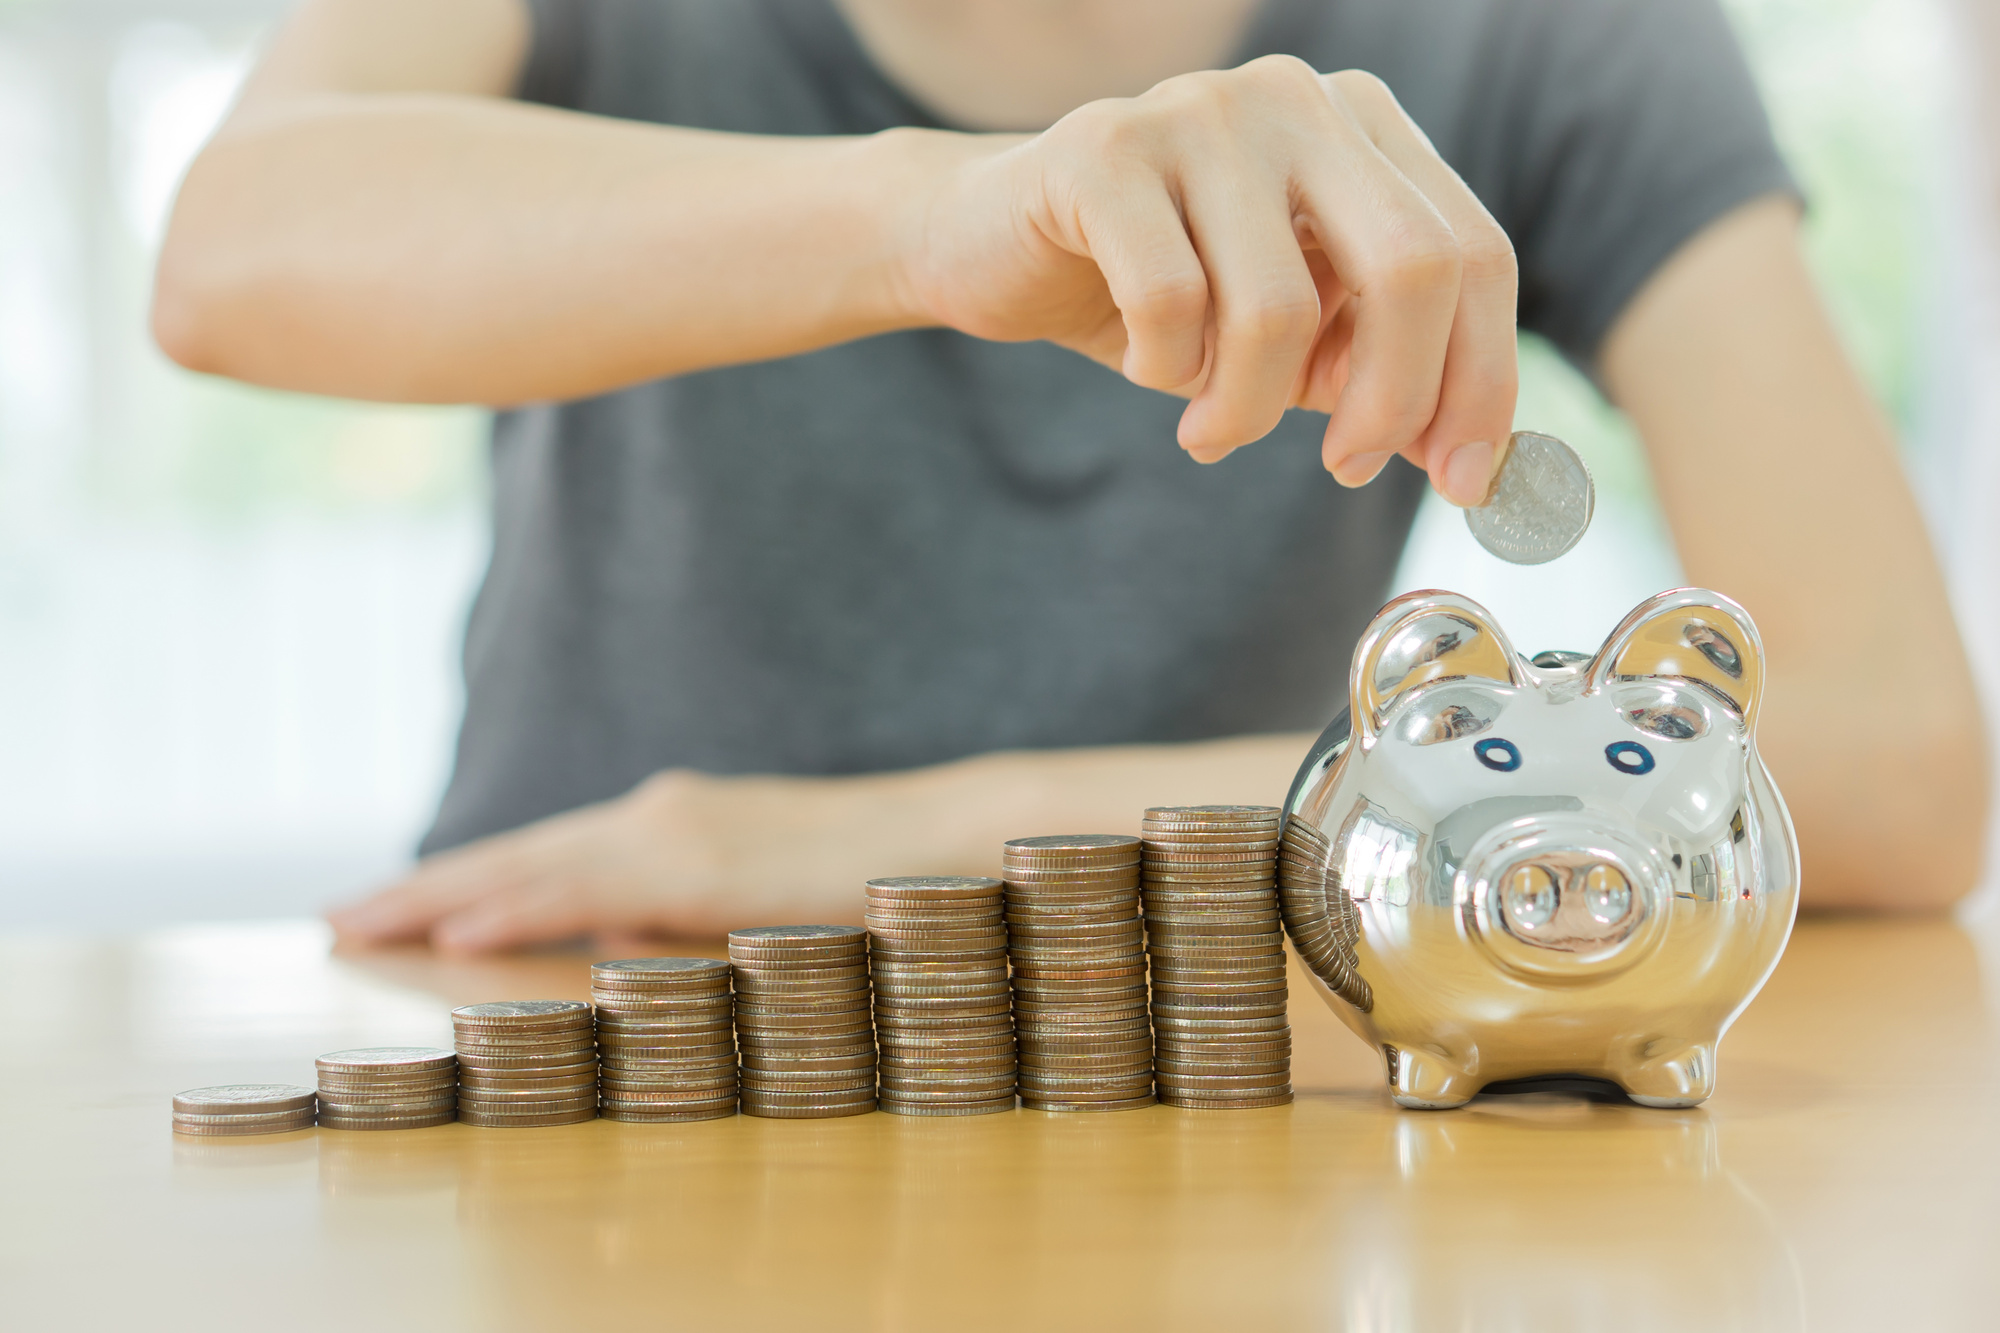 Home Financing Demonstrated by Putting Coins in a Piggy Bank